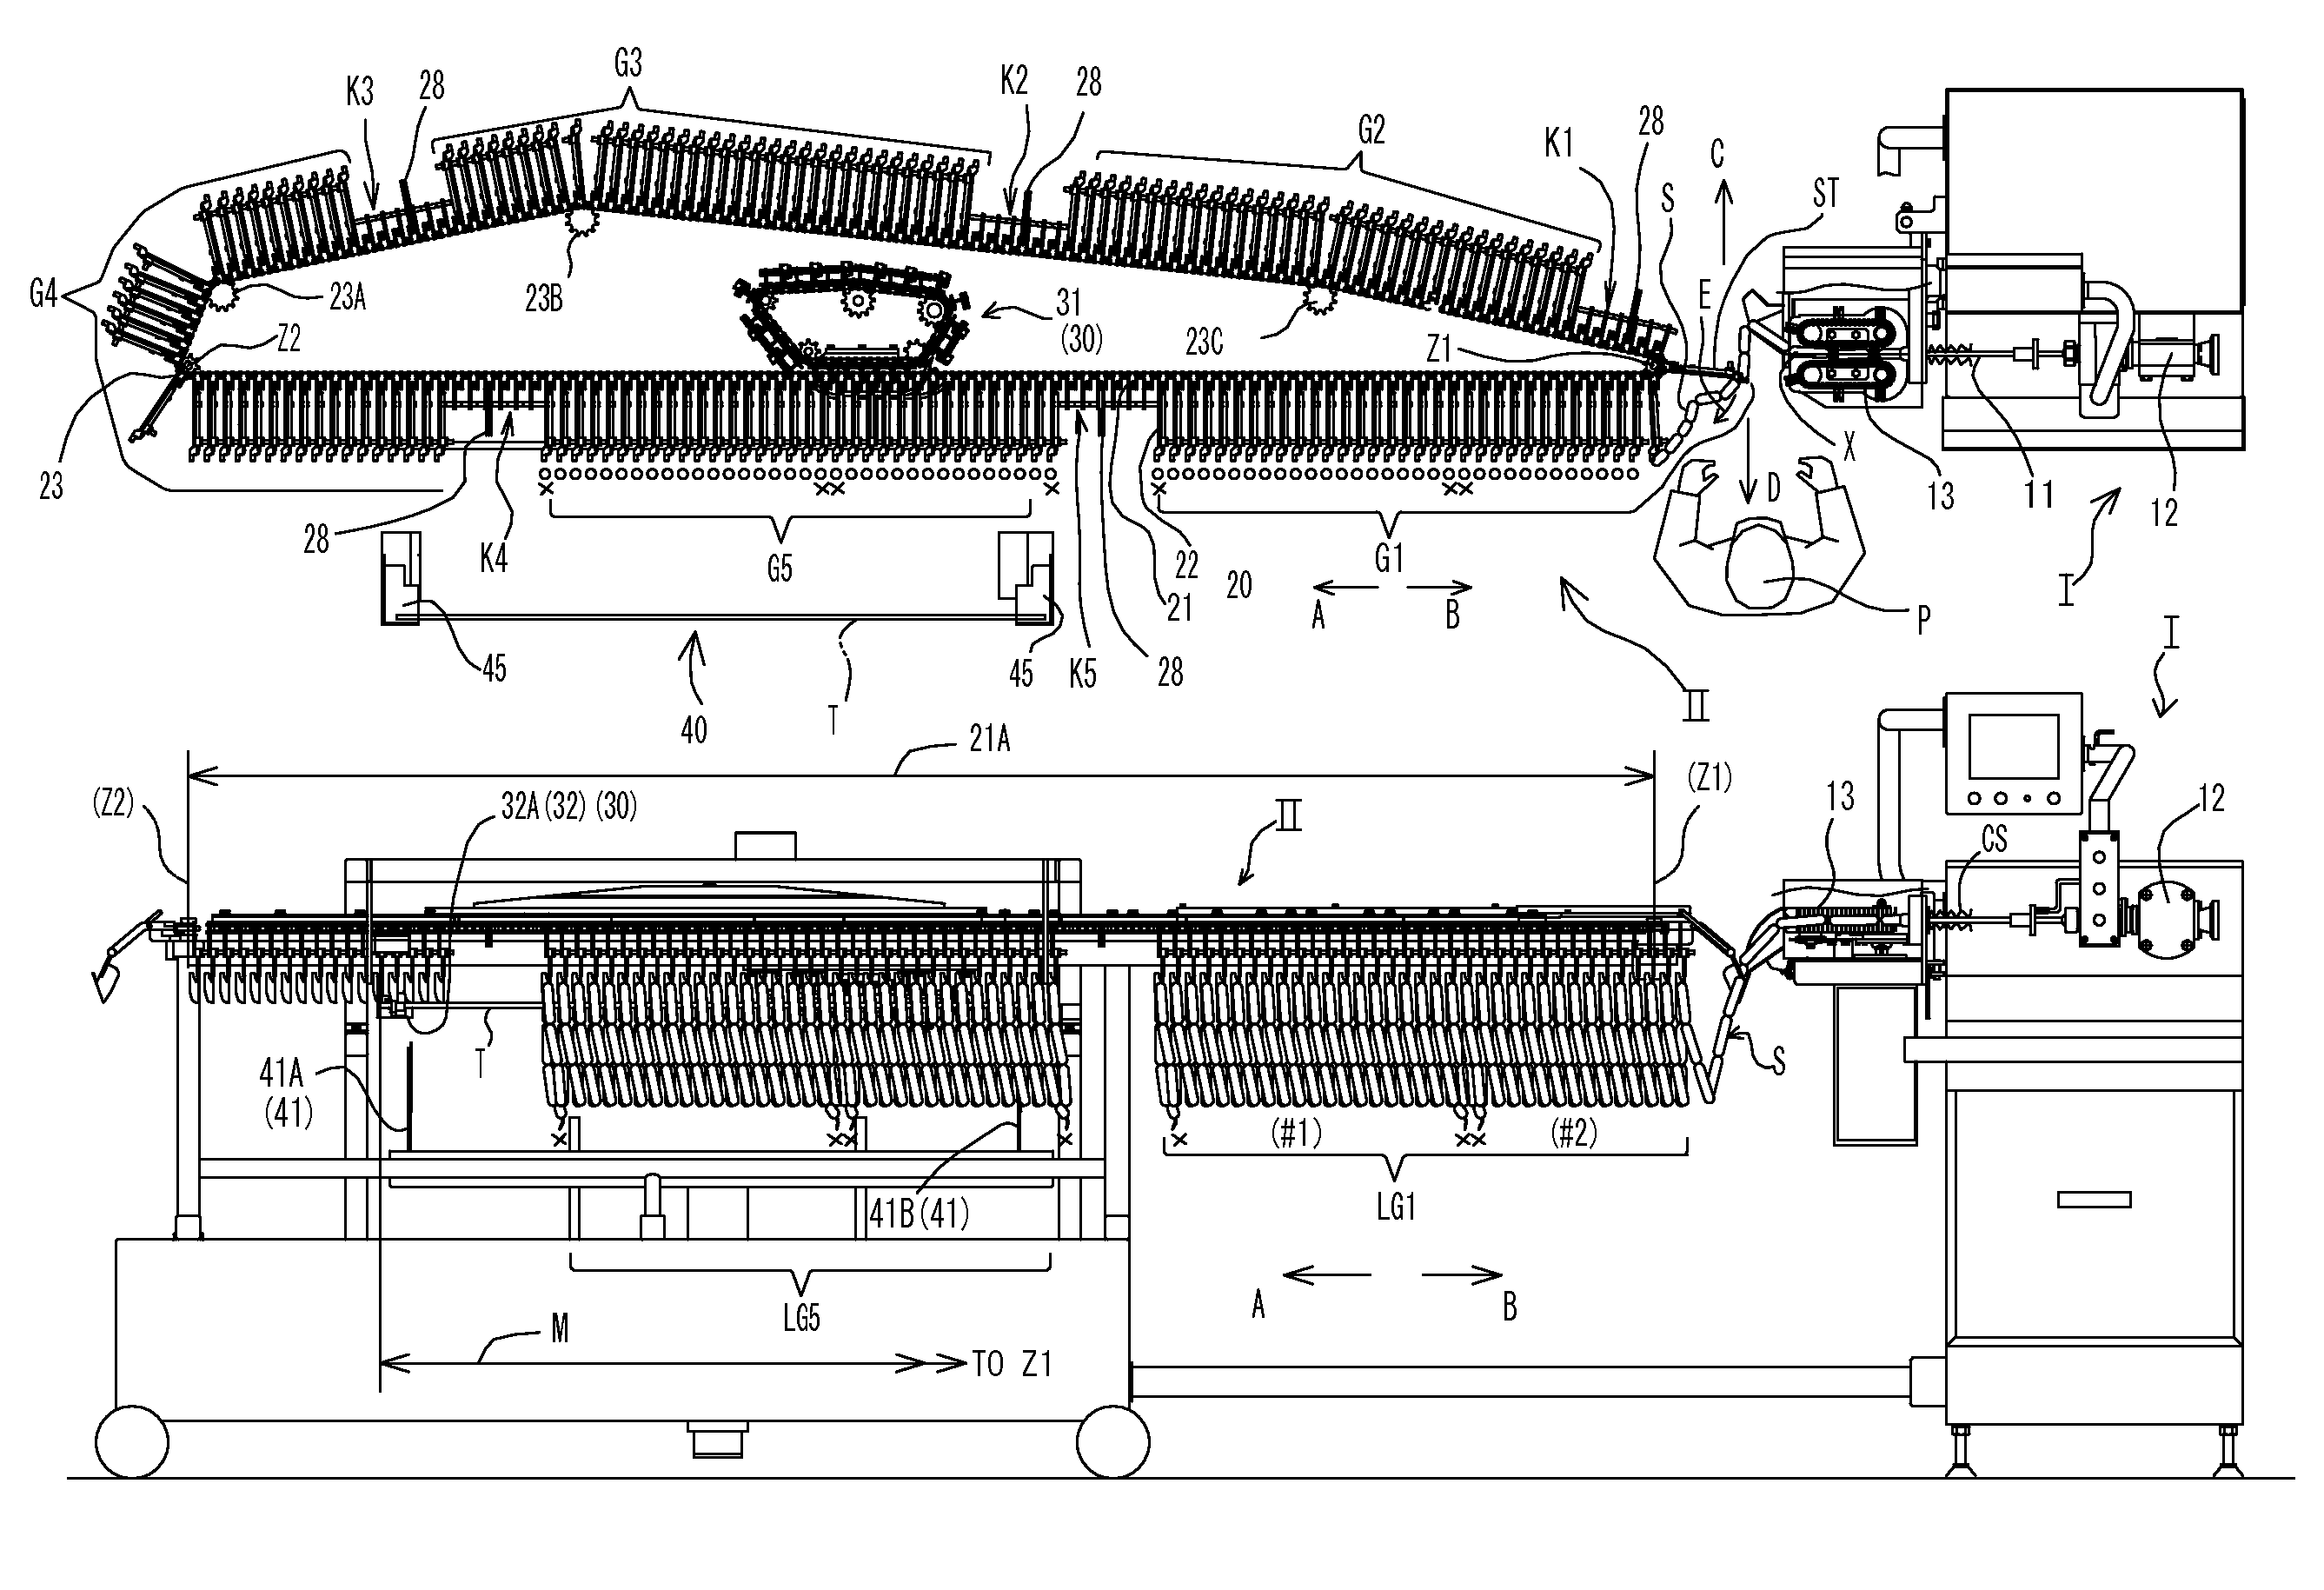 Apparatus and method for suspending sausage from hooks